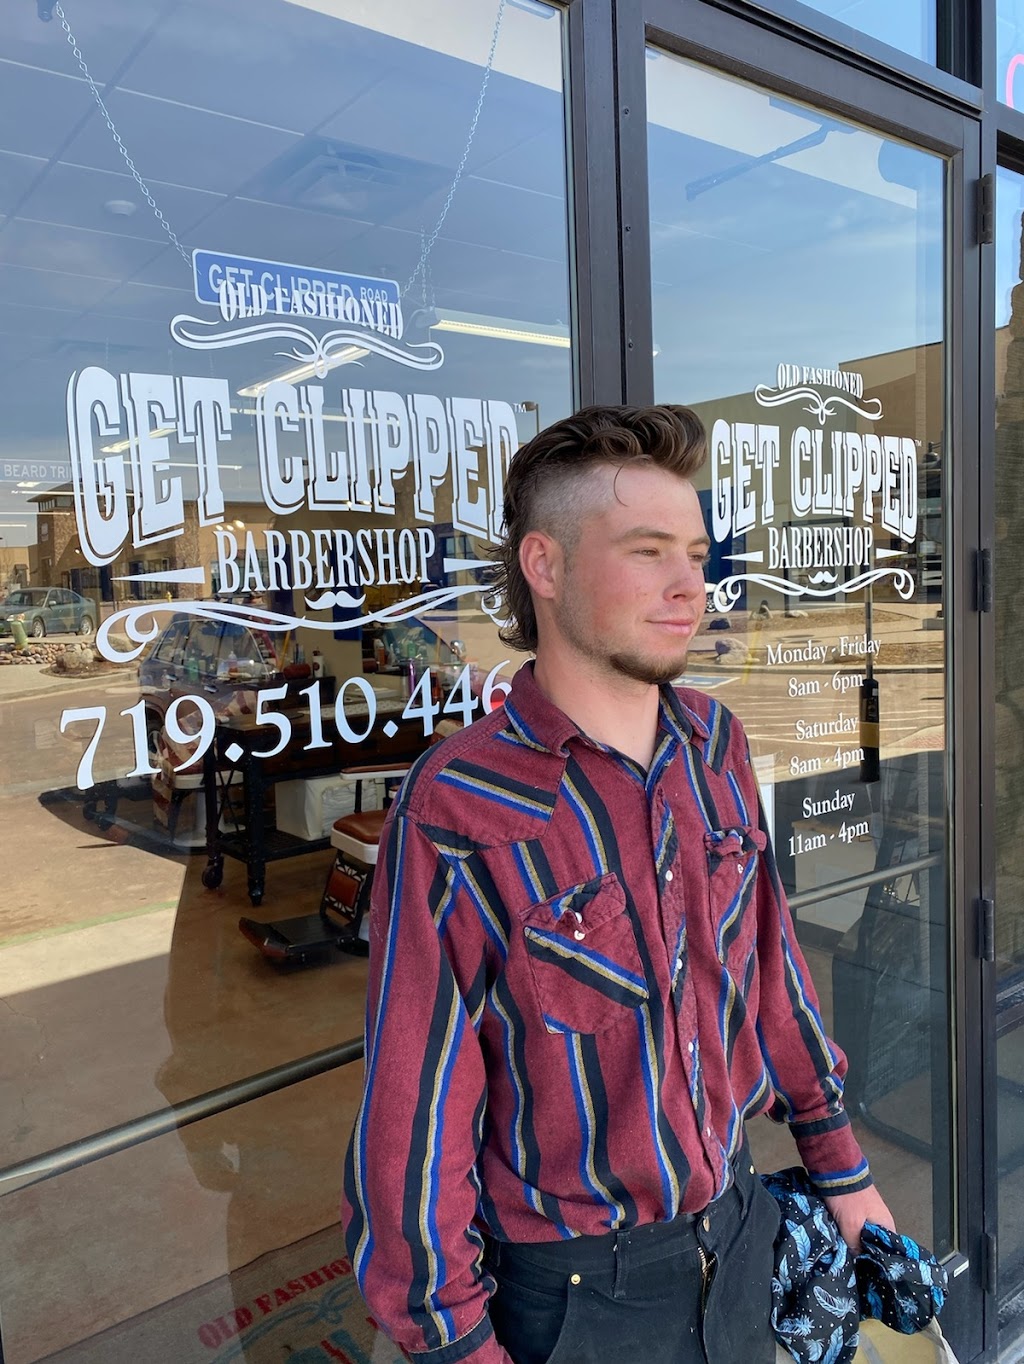 Get Clipped Barbershop | 11856 Stapleton Dr, Falcon, CO 80831 | Phone: (719) 510-4463